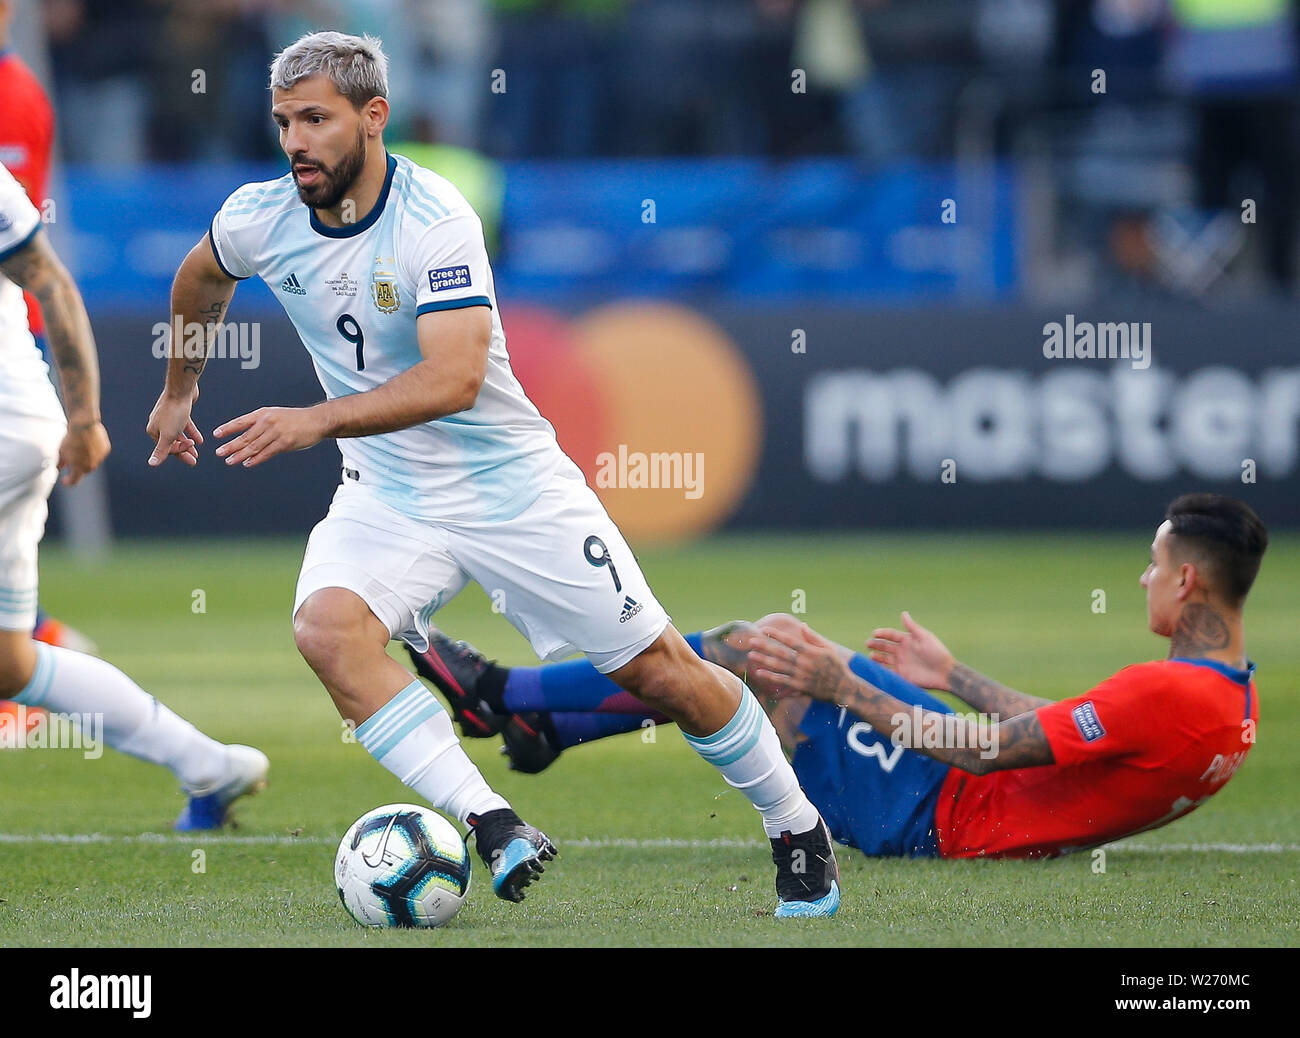 SÃO PAULO, SP - 06.07.2019: ARGENTINA VS. CHILE - Sergio Kun Aguero from Argentina during a match between Argentina and Chile, valid for the third place match of the Copa América 2019, held this Saturday (06) at the Corinthians Arena in São Paulo, SP. (Photo: Marcelo Machado de Melo/Fotoarena) Stock Photo